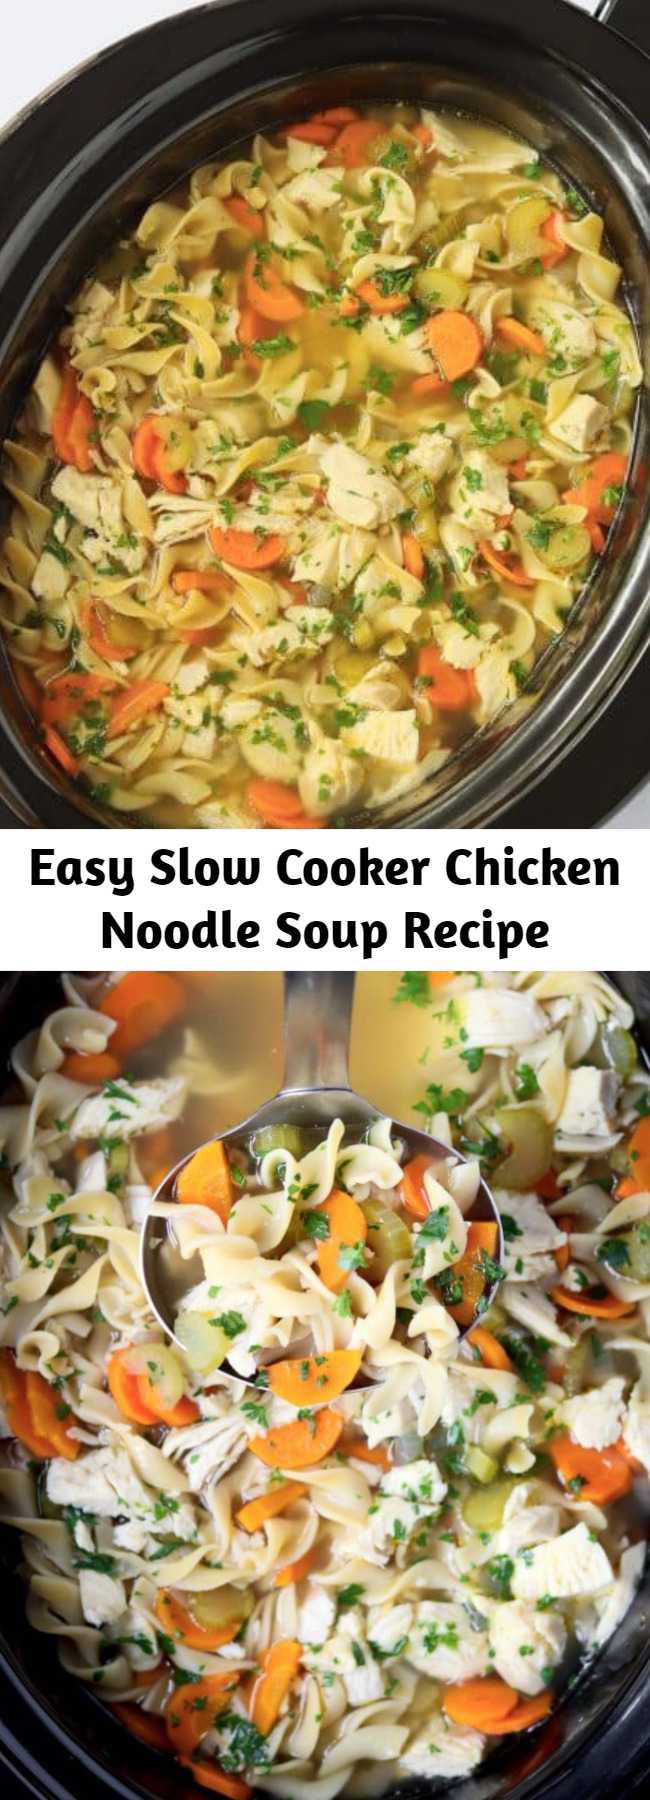 Easy Slow Cooker Chicken Noodle Soup Recipe - Slow Cooker Chicken Noodle Soup is the ultimate comfort recipe. Hearty, comforting, and perfect for cold weather. Let your crockpot do the work. Just add all the ingredients and let it cook all day. Simple and easy way to make comforting, healthy, homemade Chicken Noodle Soup. #slowcookersoup #chickennoodle #chickennoodlesoup #crockpotsoup